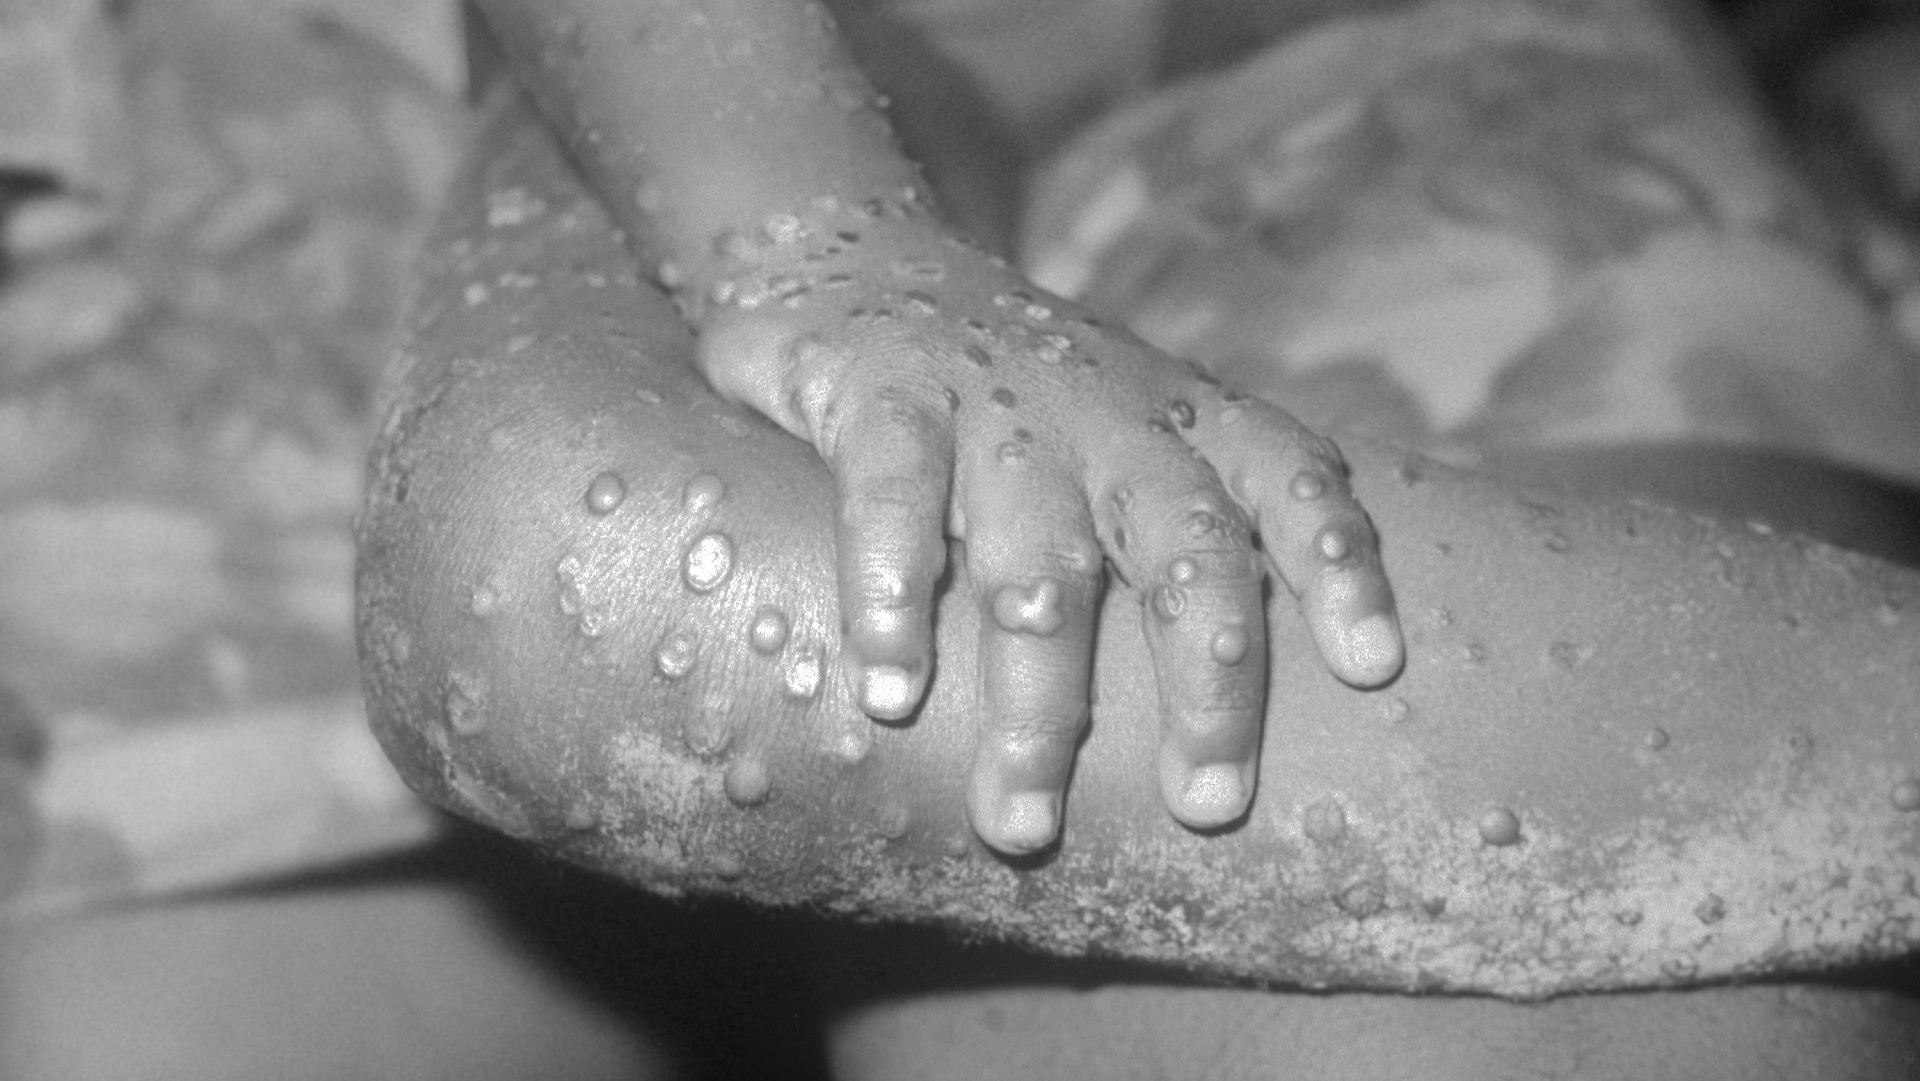 This image from 1971 depicts a 4 year-old girl in Liberia, with numerous monkeypox lesions.